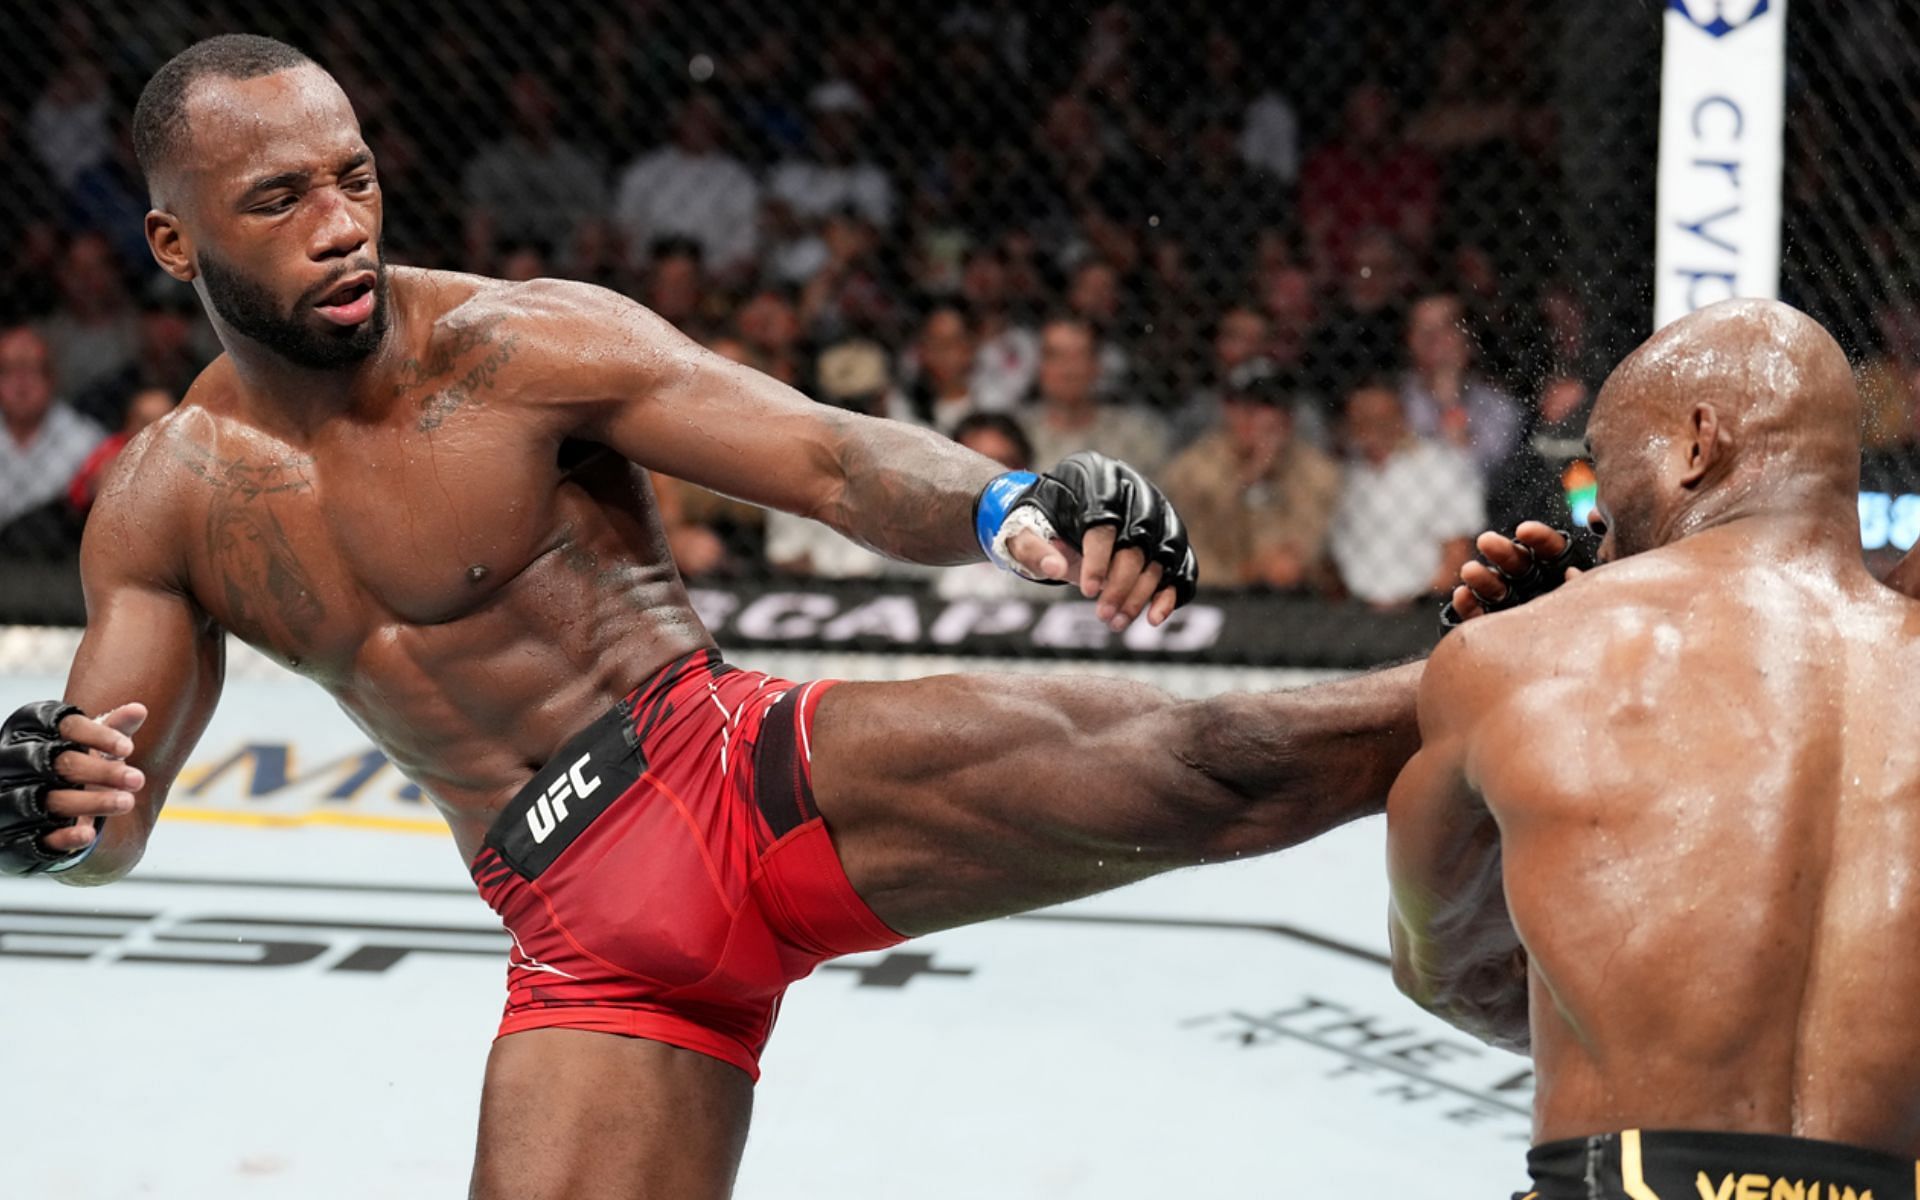 Leon Edwards claimed the UFC welterweight title by knockout out Kamaru Usman with a head kick